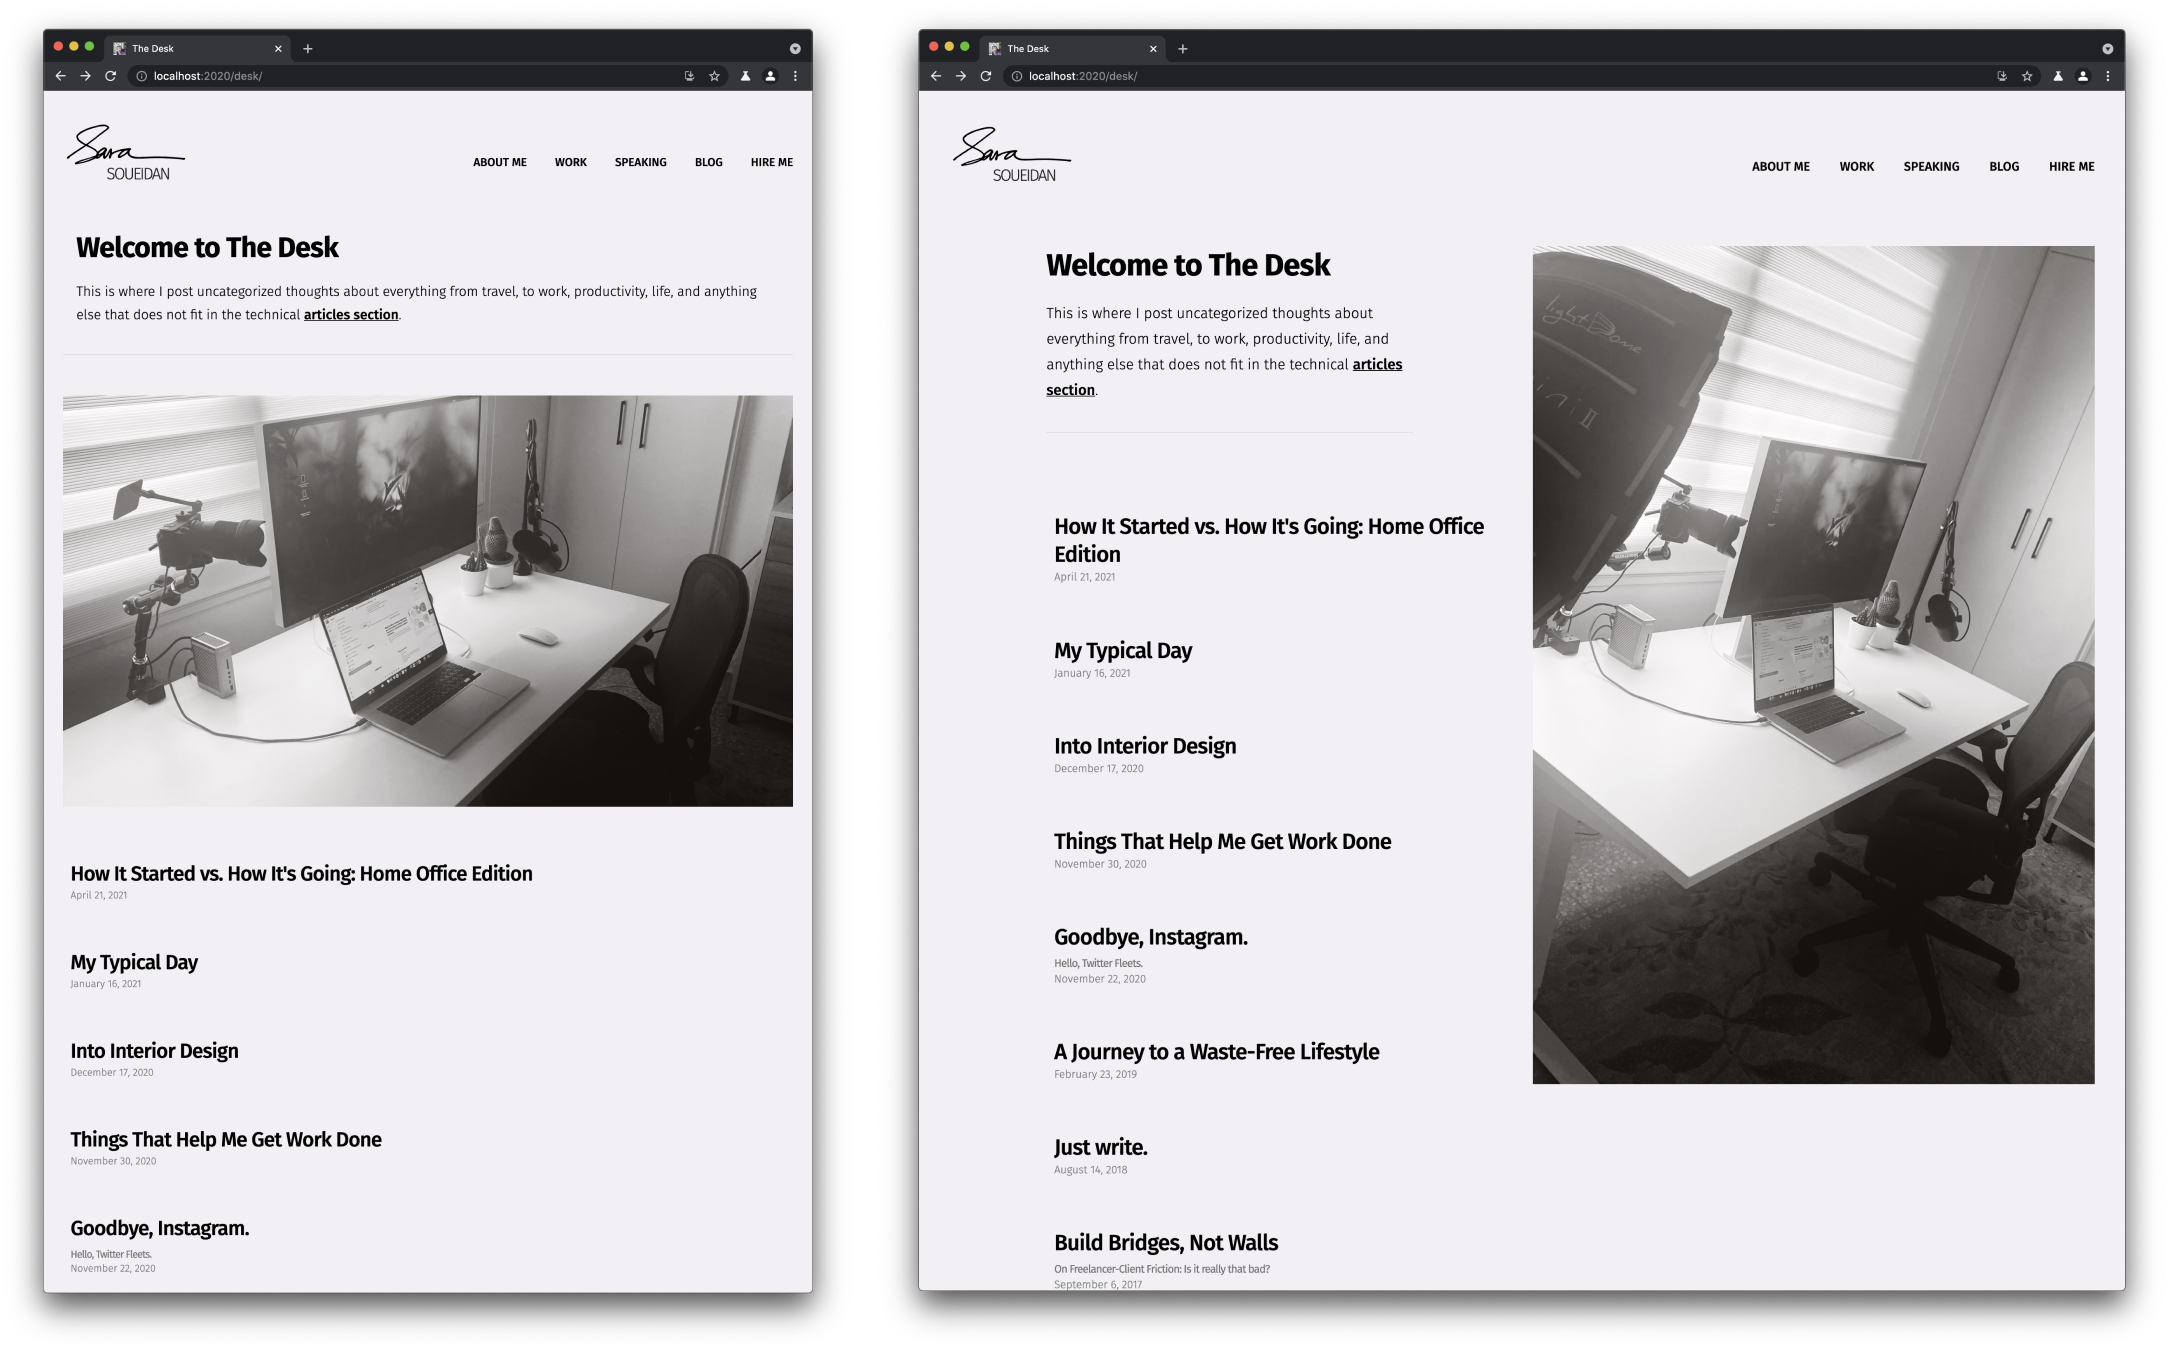 A screenshot of the Desk page showing two different photos of my desk setup on narrower and wider screens.